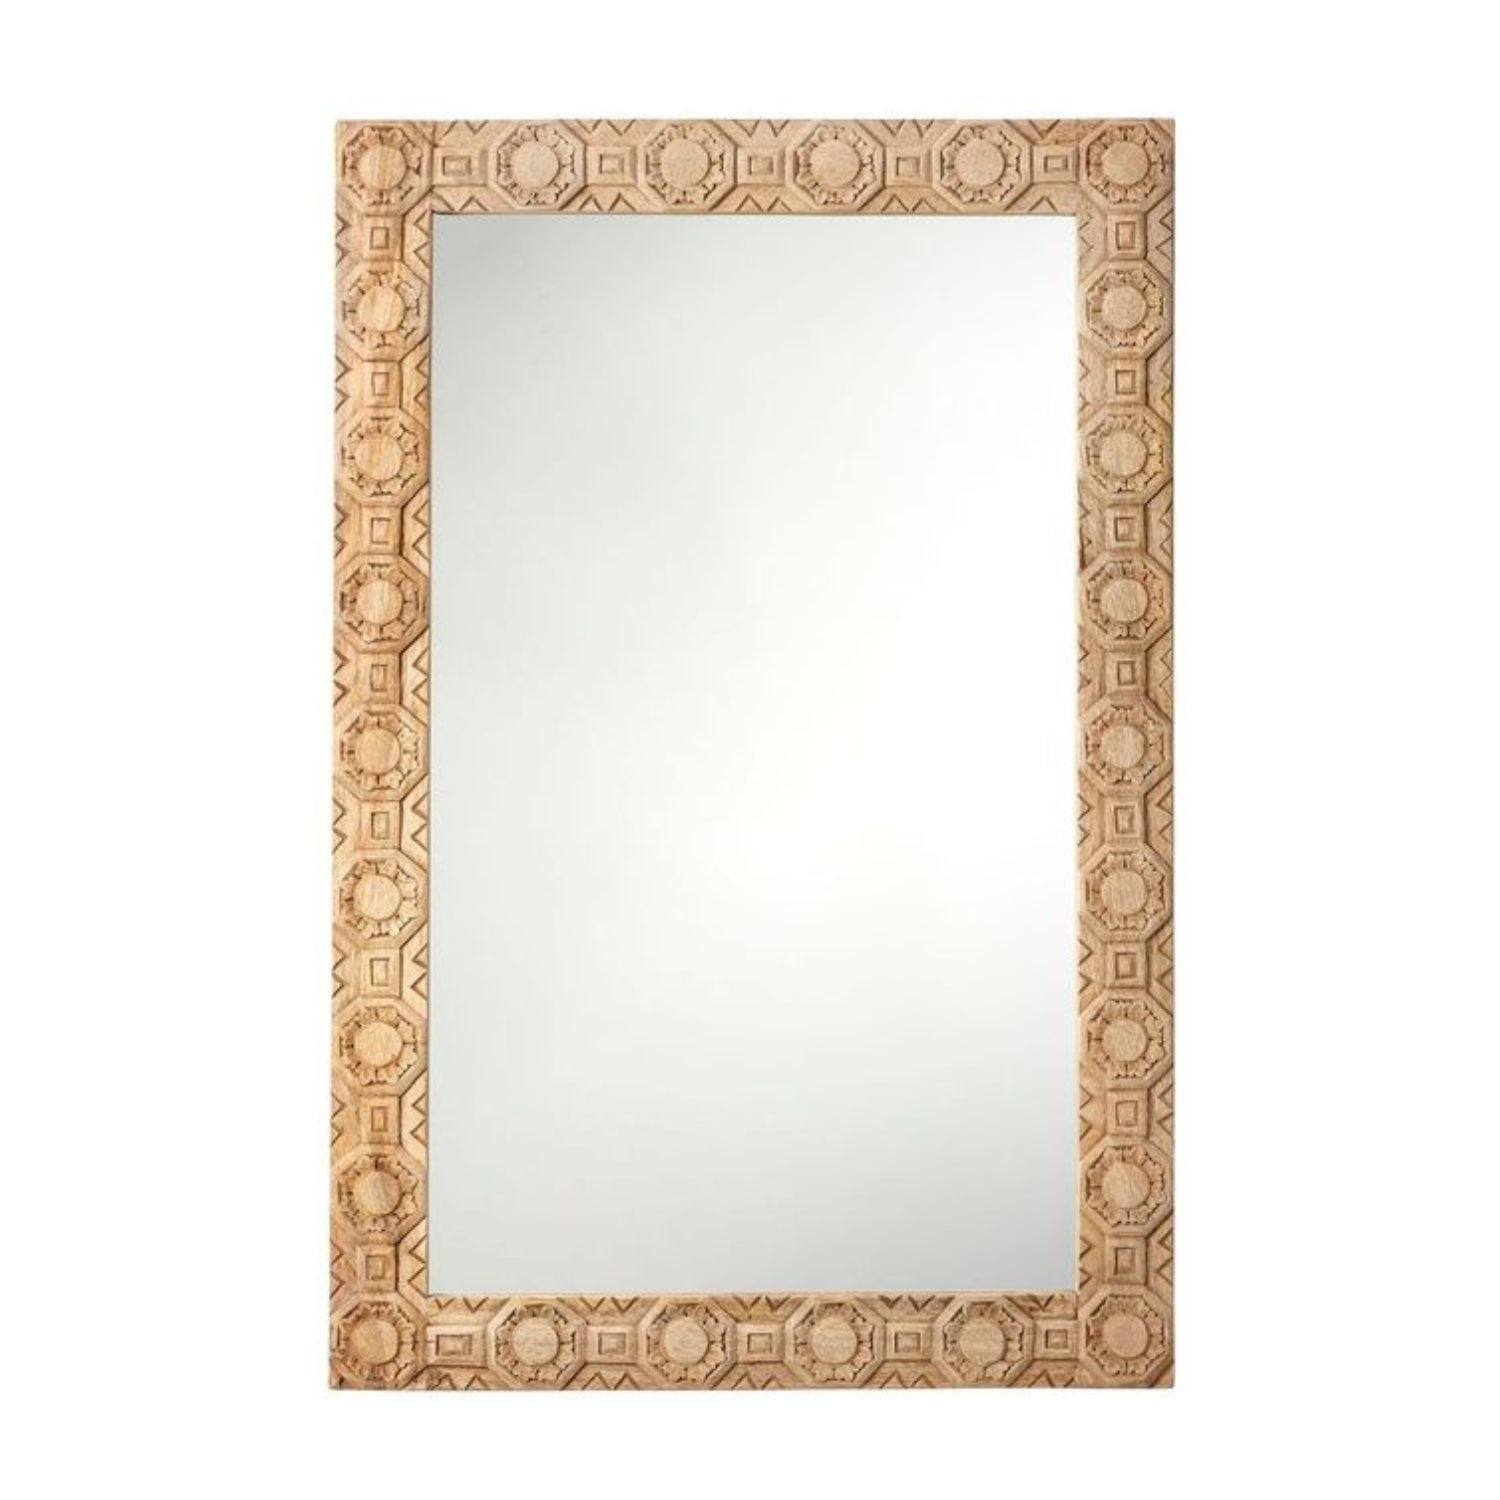 Relief Wood Carved Rectangle Mirror